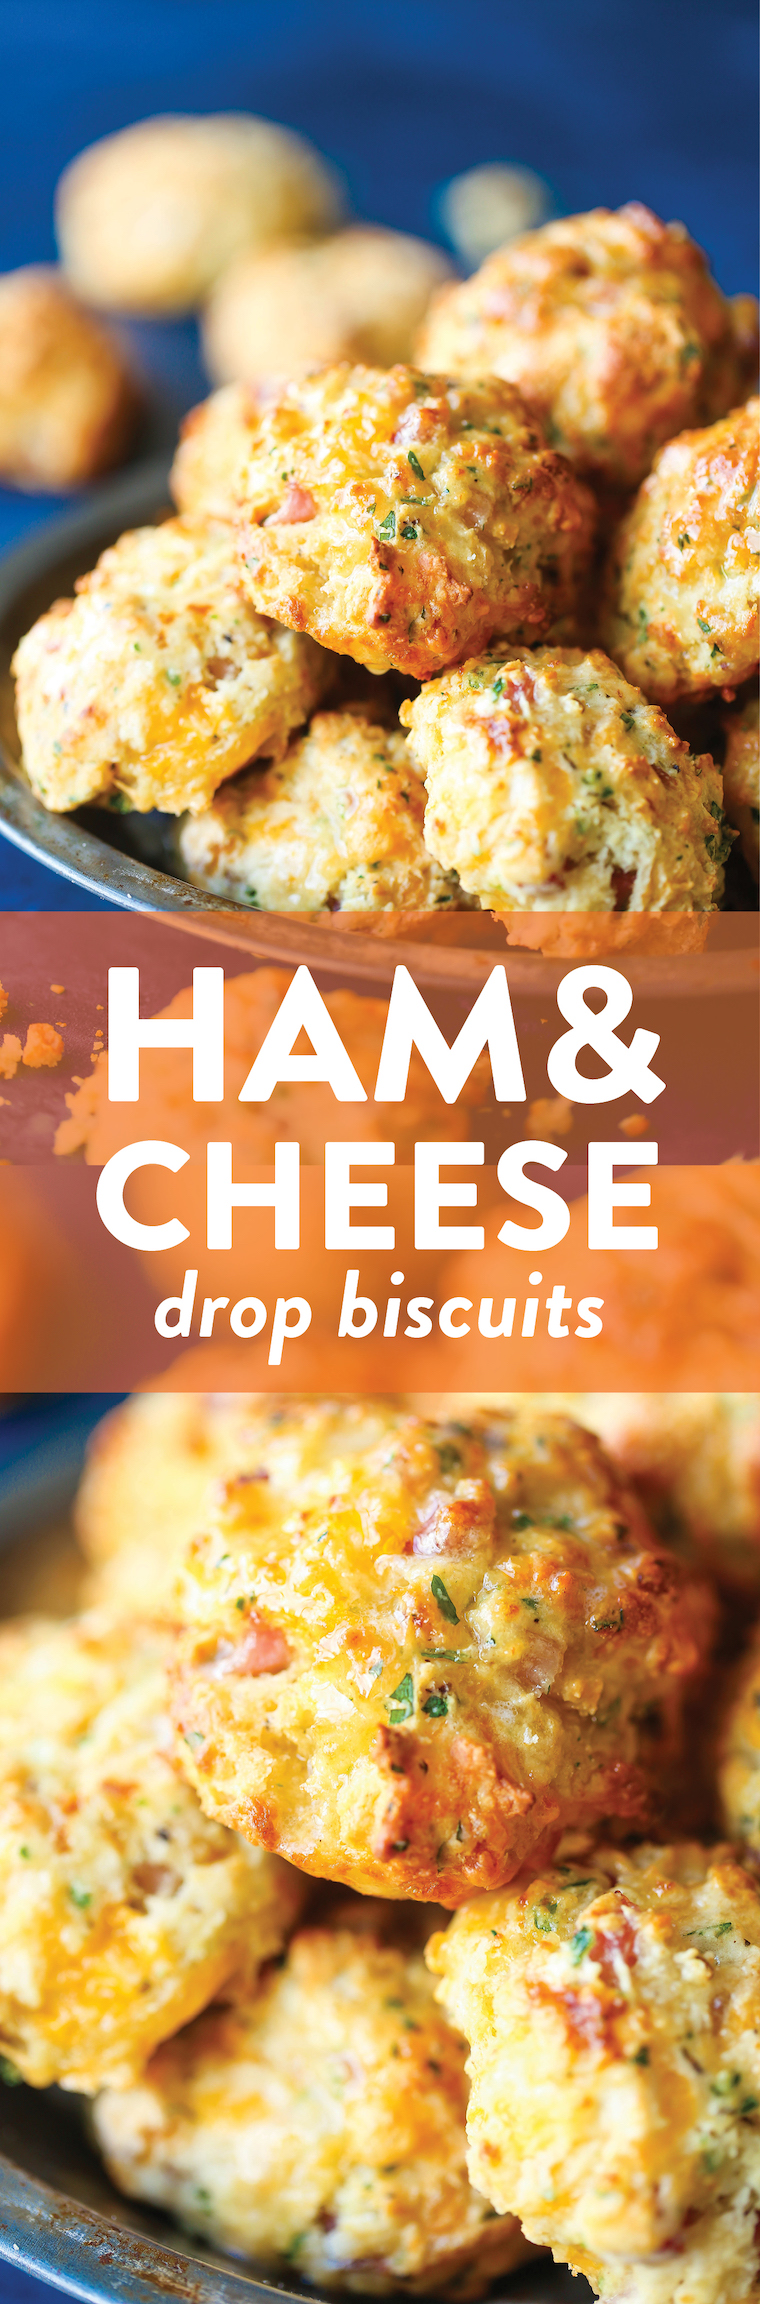 Ham and Cheese Drop Biscuits - The easiest, simplest homemade drop biscuits made with less than 20min prep! And they're so buttery, so flaky and so perfect!